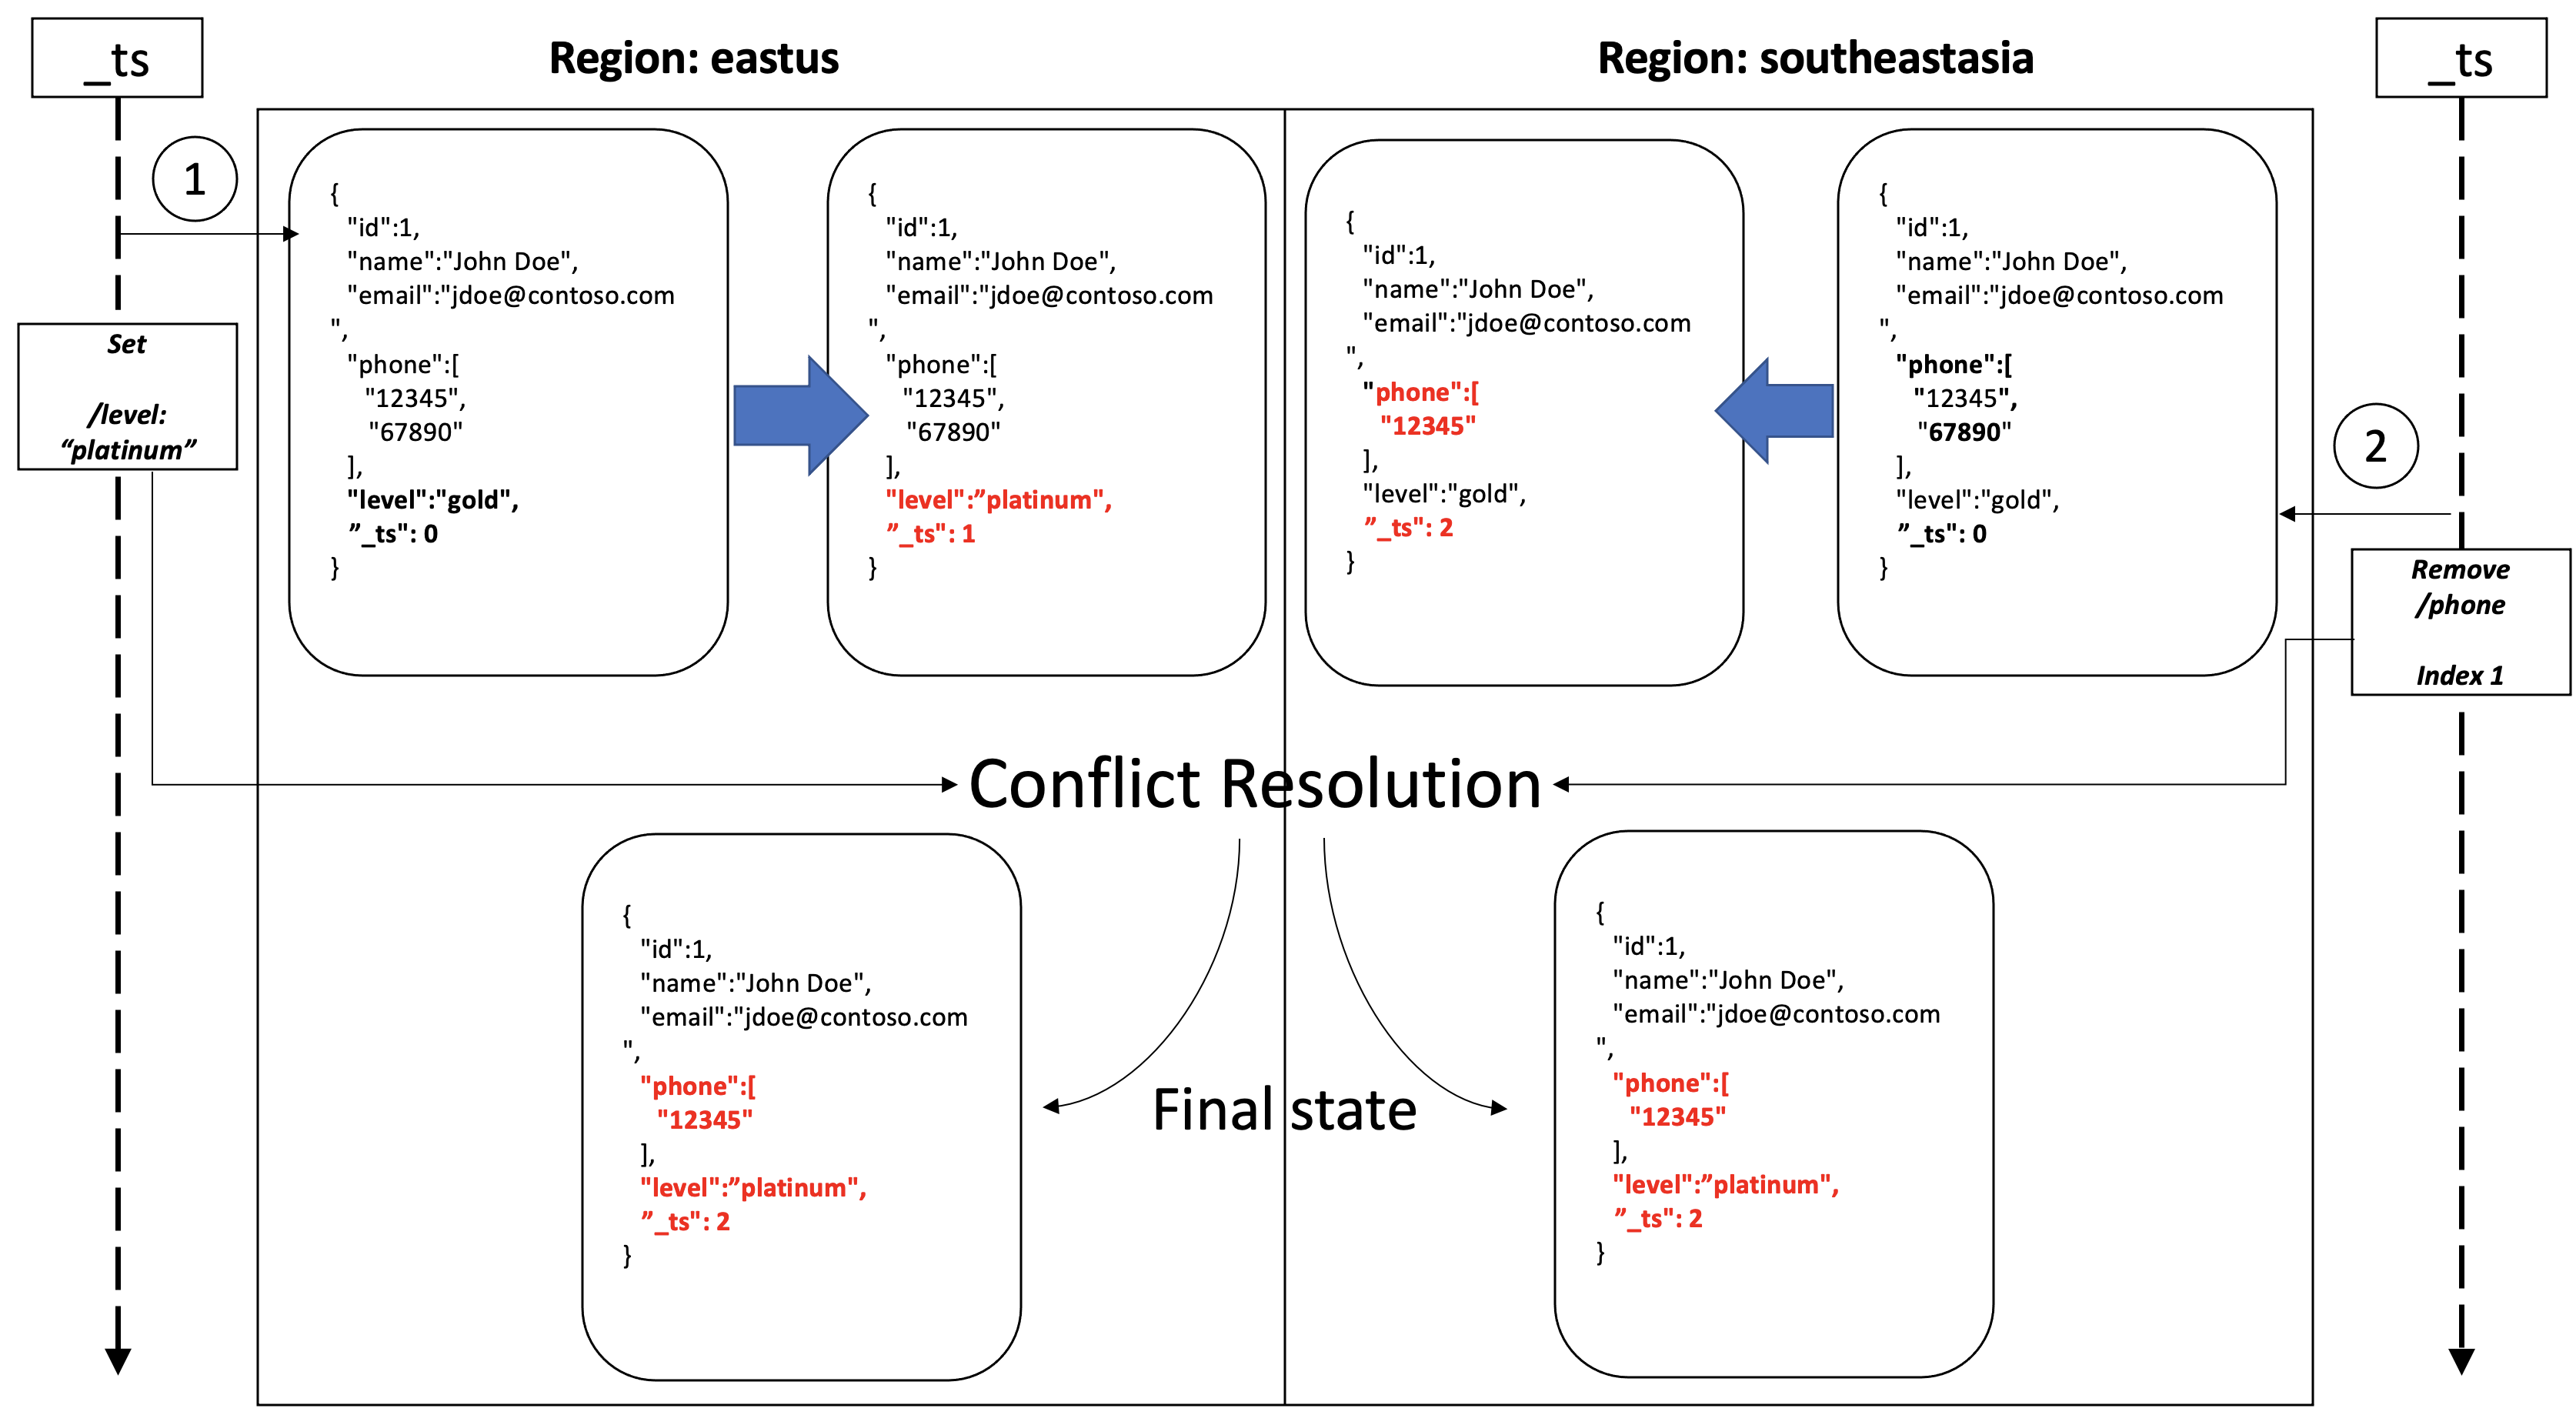 An image that shows conflict resolution in concurrent multi-region partial update operations.